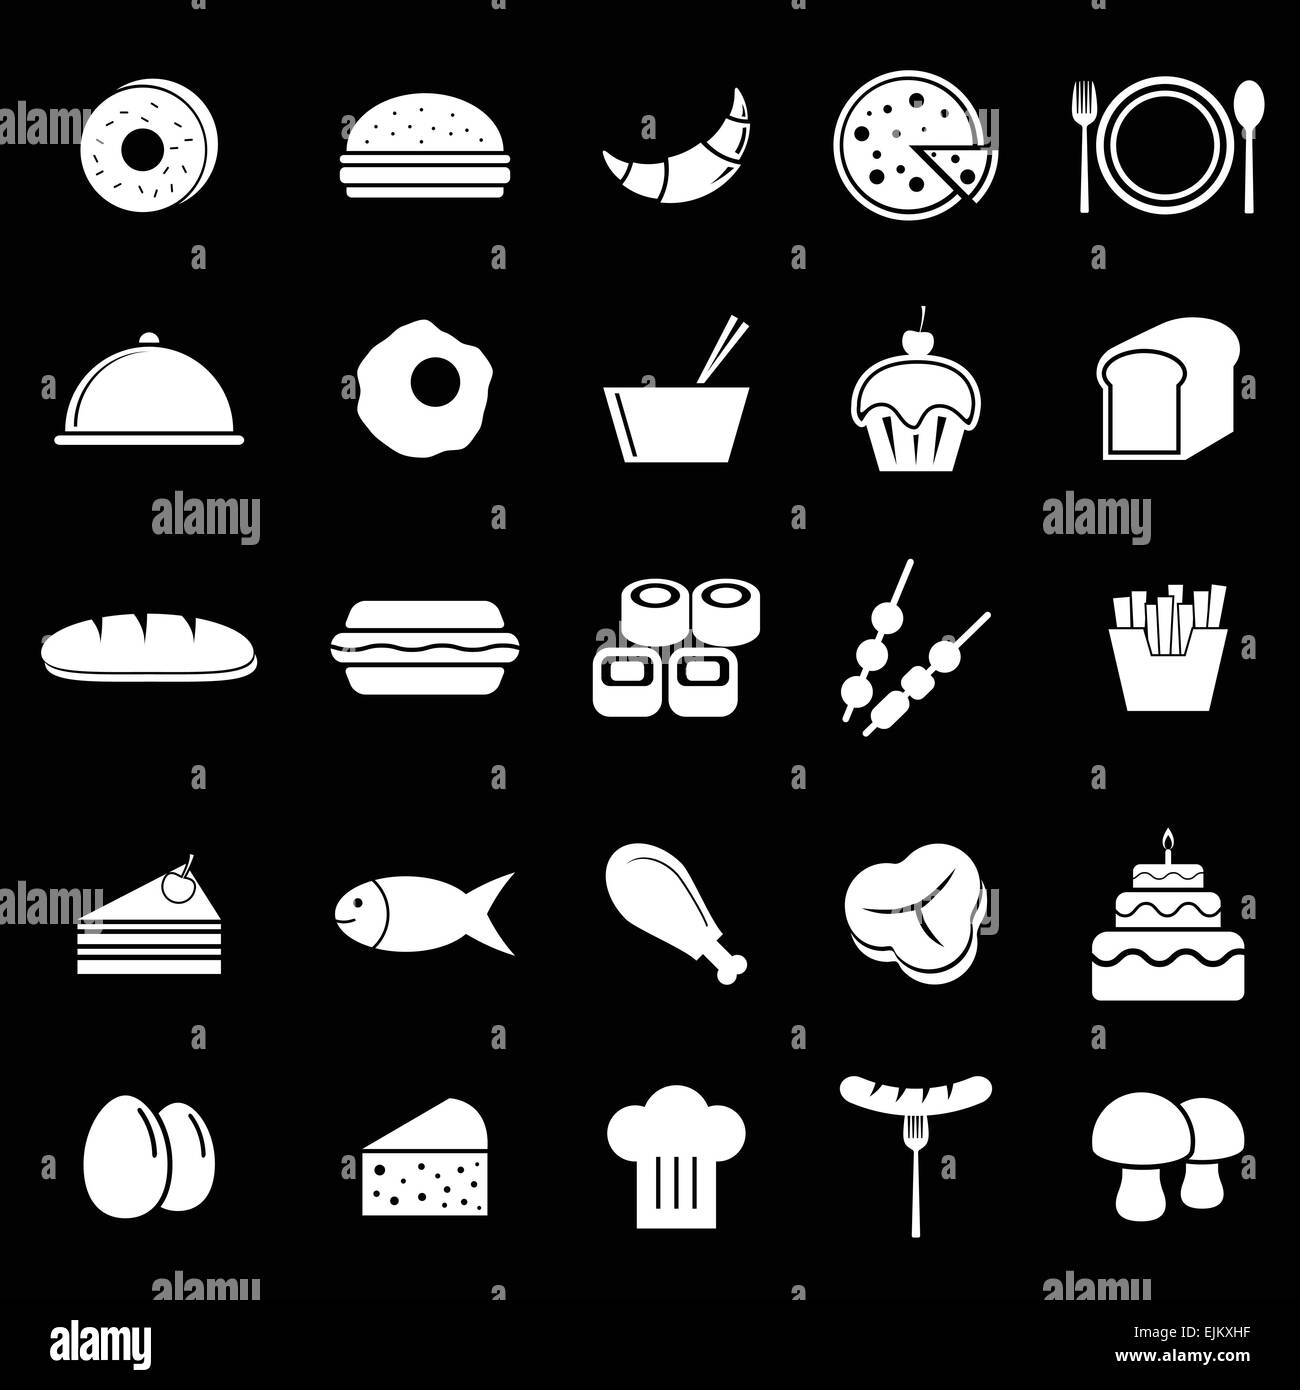 Food icons on black background, stock vector Stock Vector